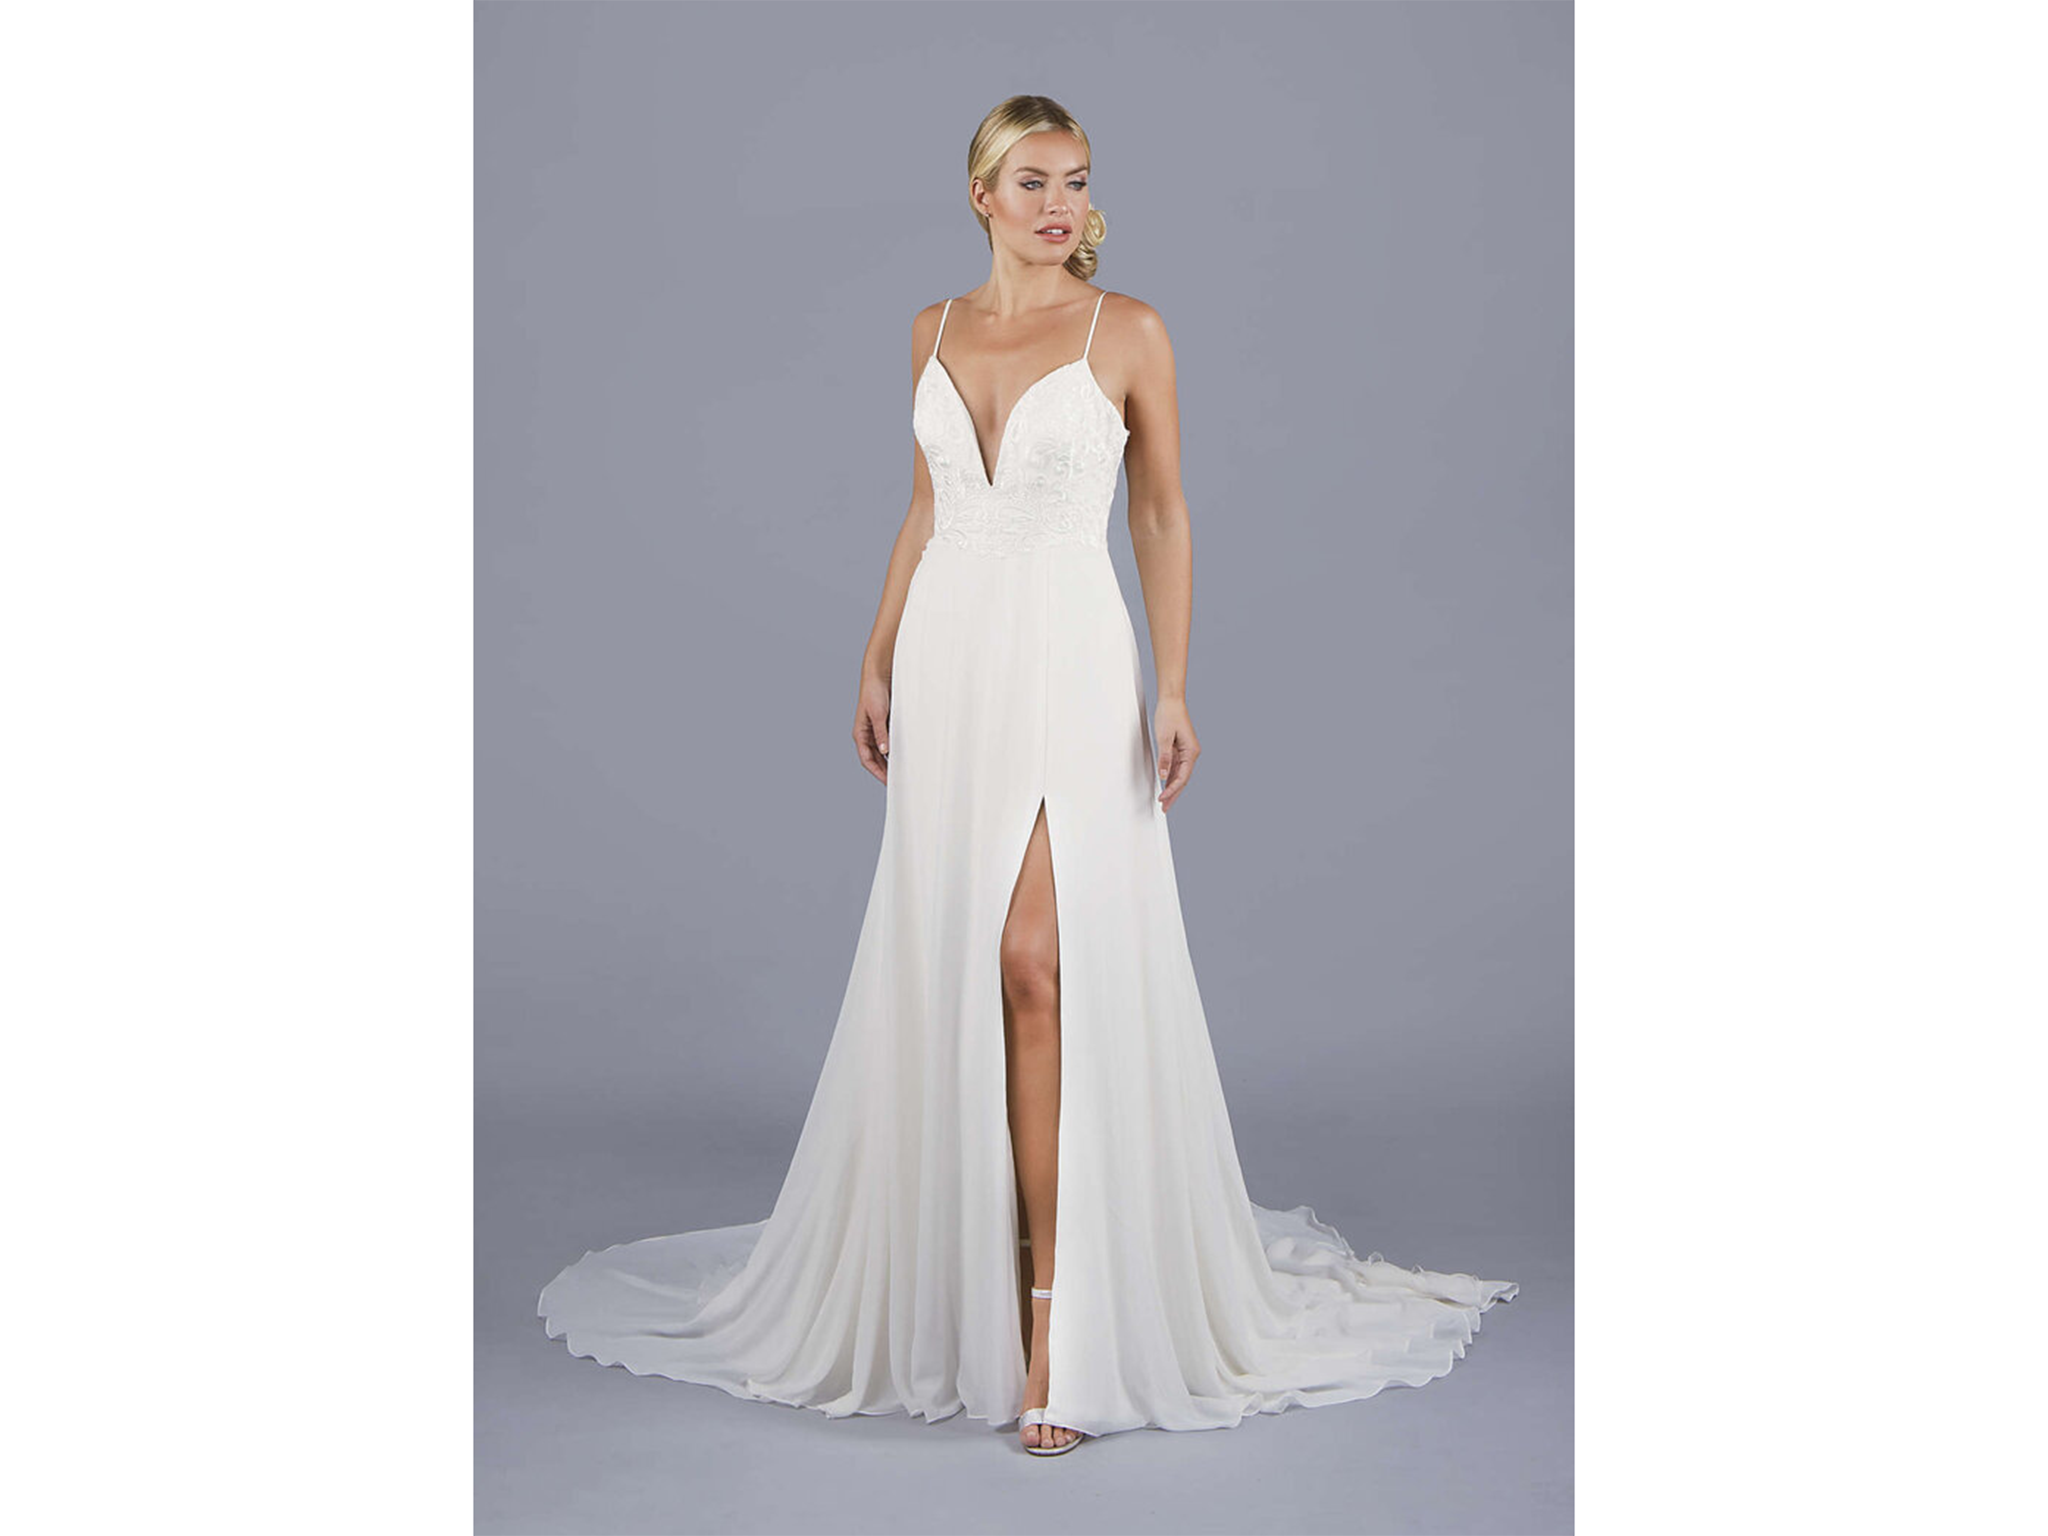 TOP 10 BEST Second Hand Wedding Dress in Los Angeles, CA - Yelp - March 2024